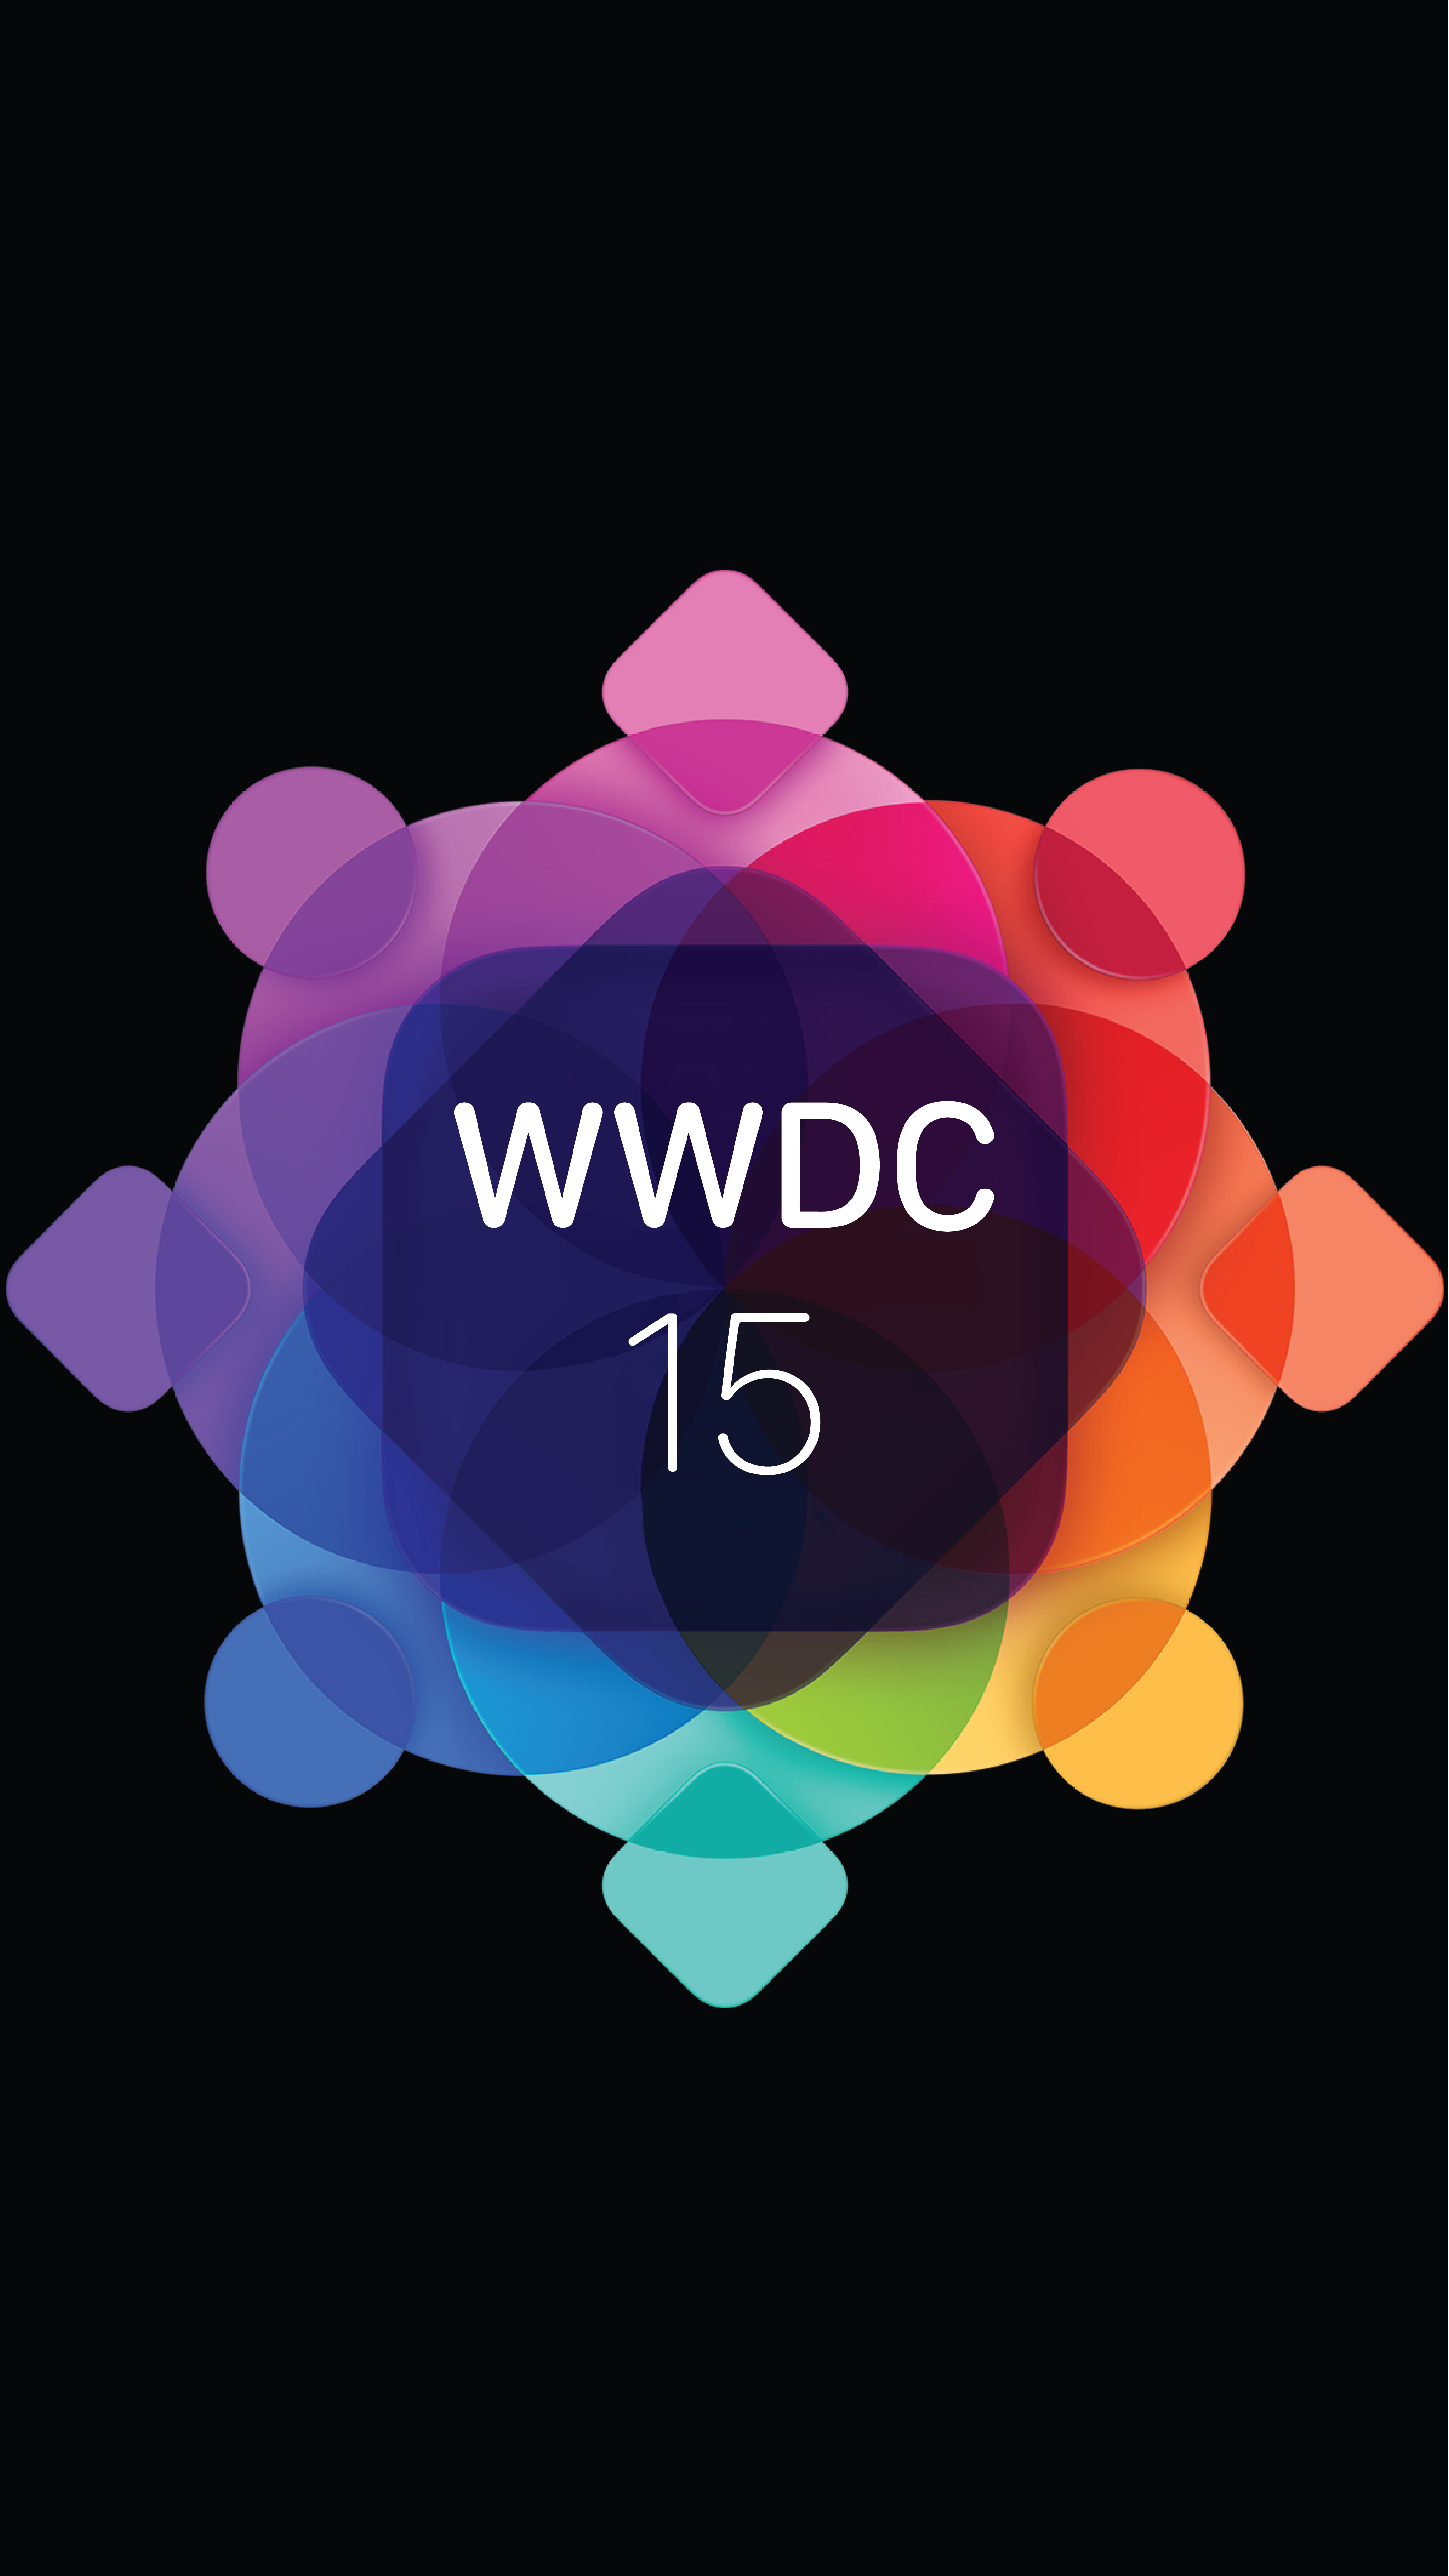 WWDC 2015 wallpaper: the epicenter of change